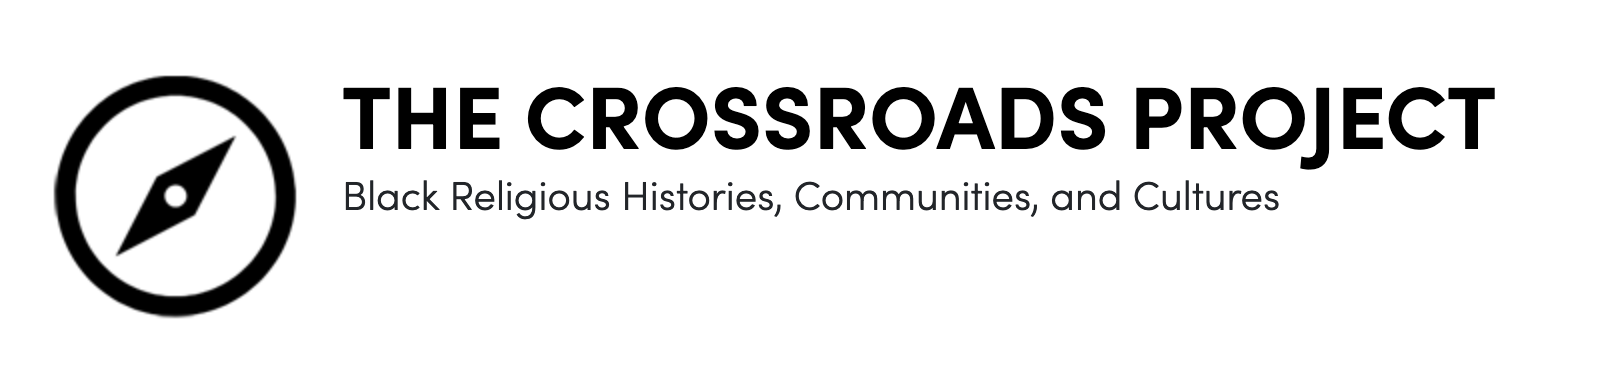 The Crossroads Project: Black Religious Histories, Communities, and Cultures